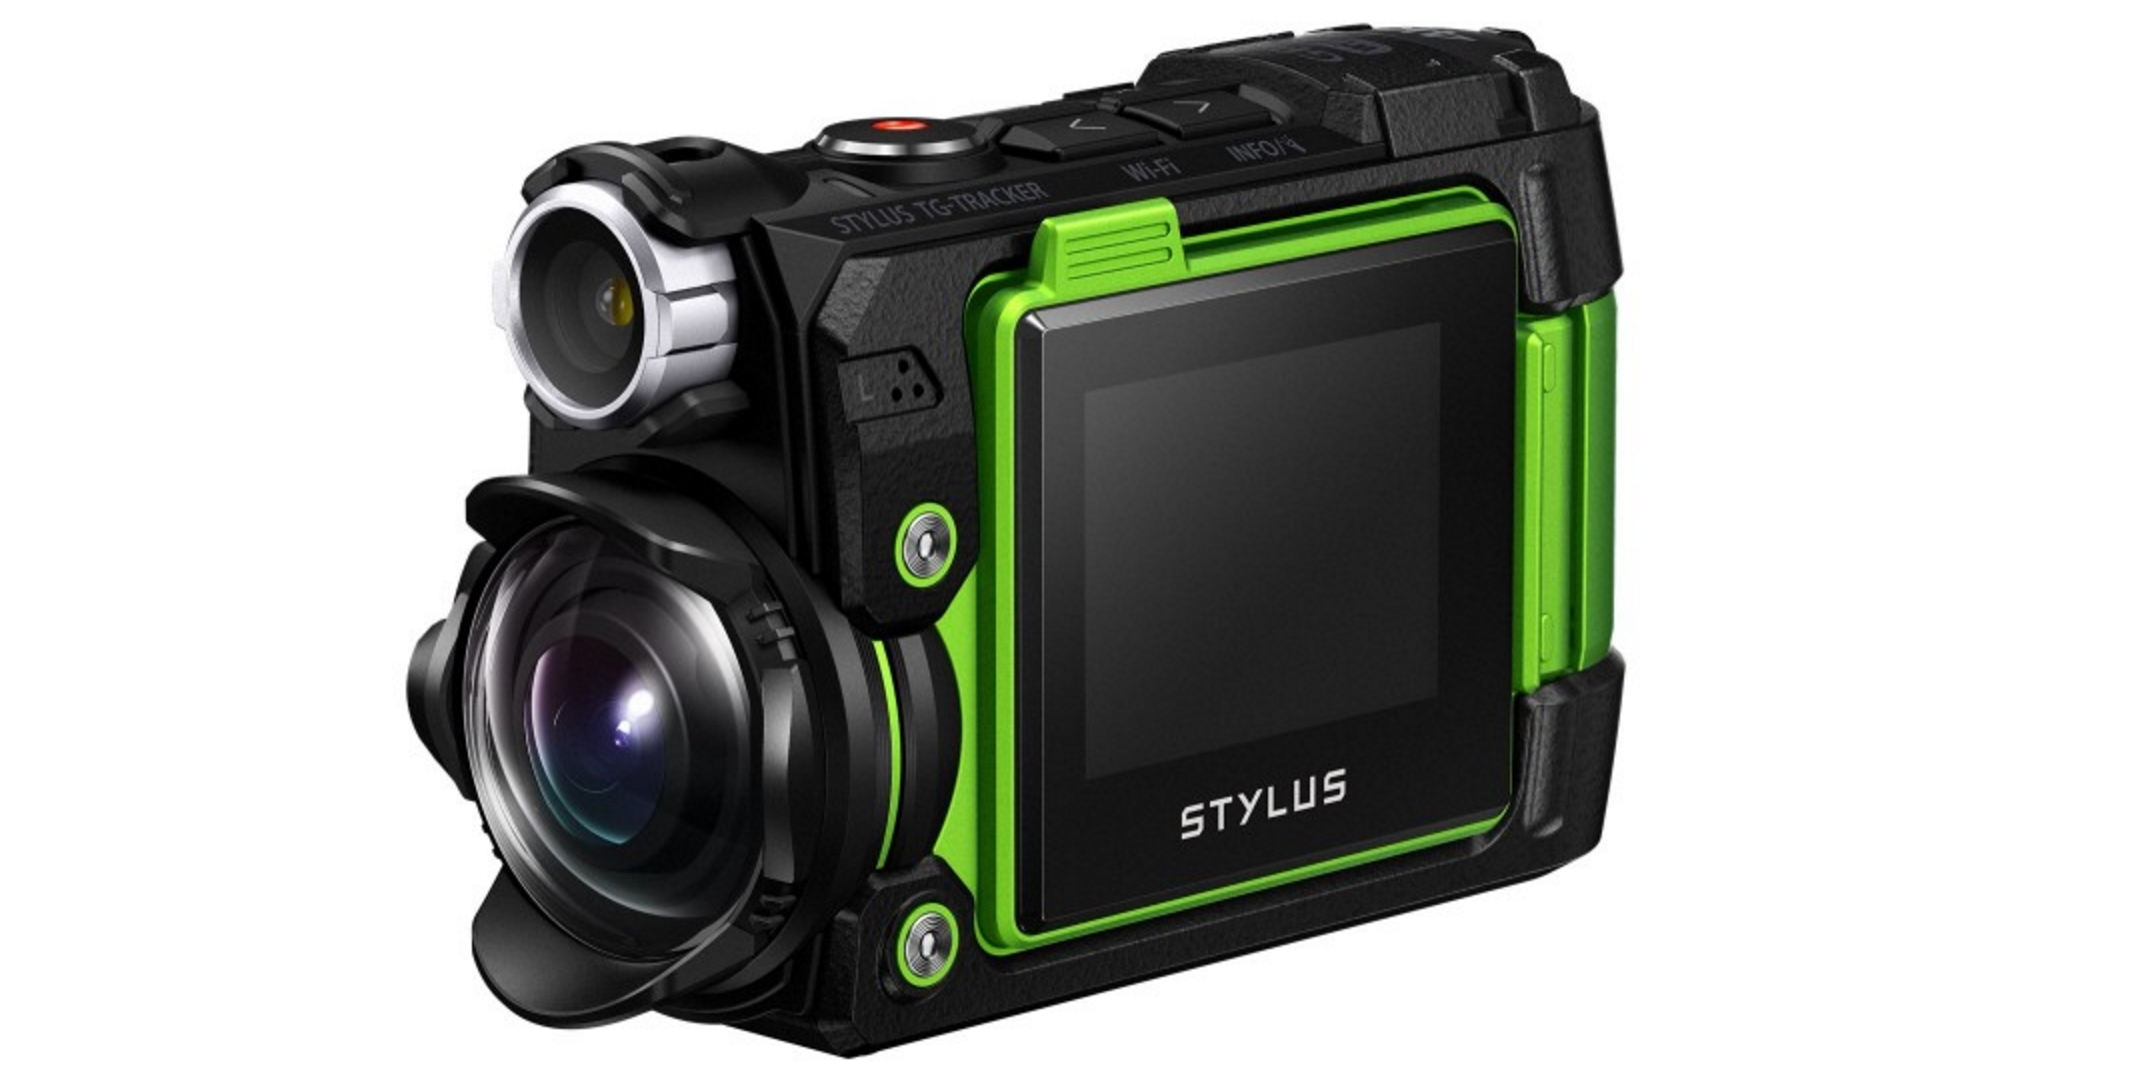 Olympus wants you to beat the hell out of its new Tough TG-Tracker